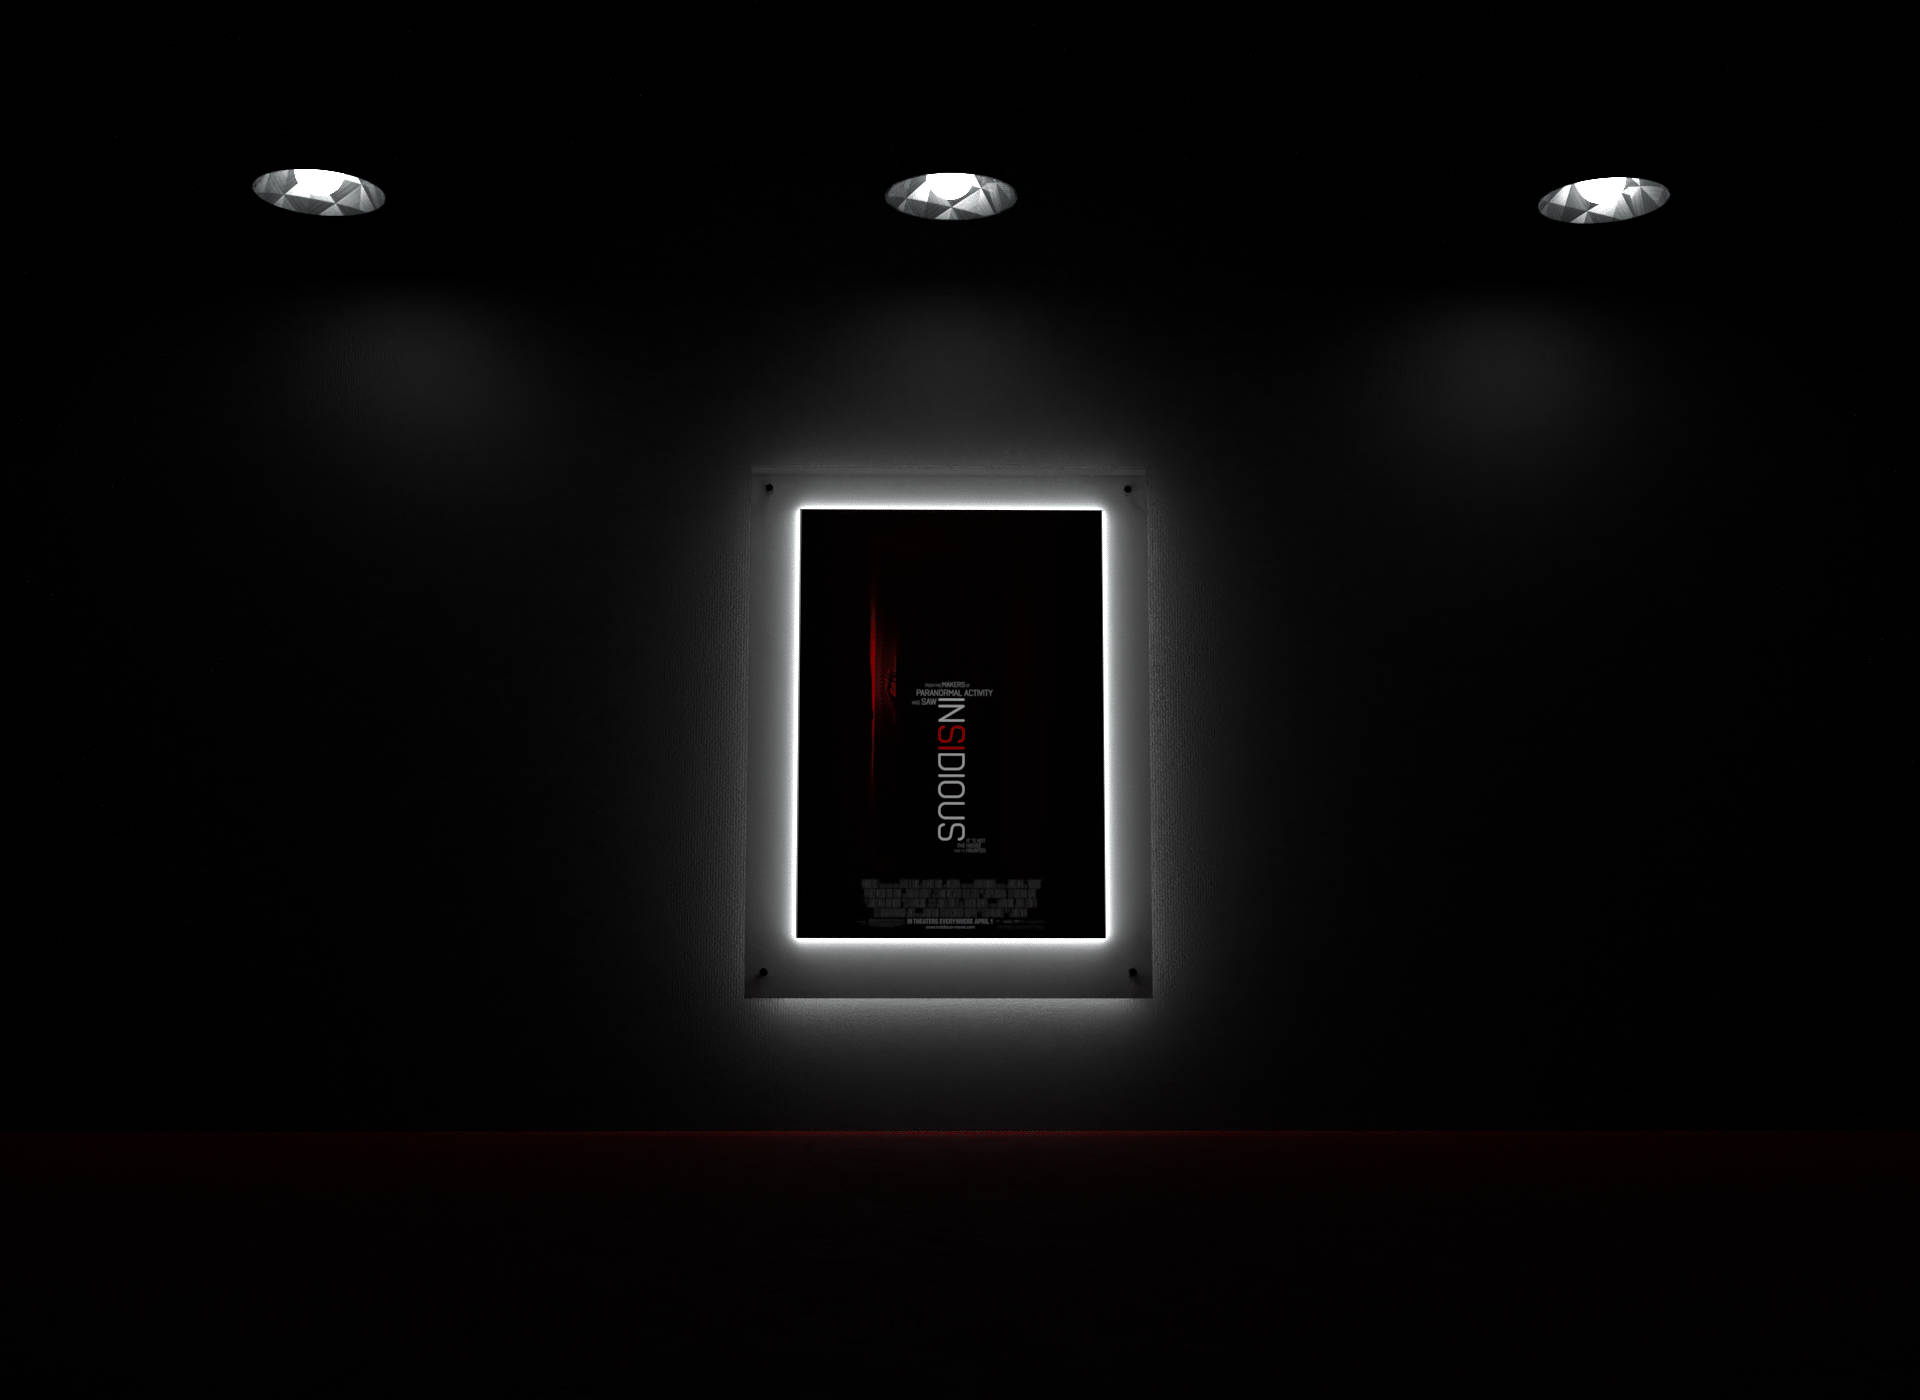 Cool Insidious Film Poster Background